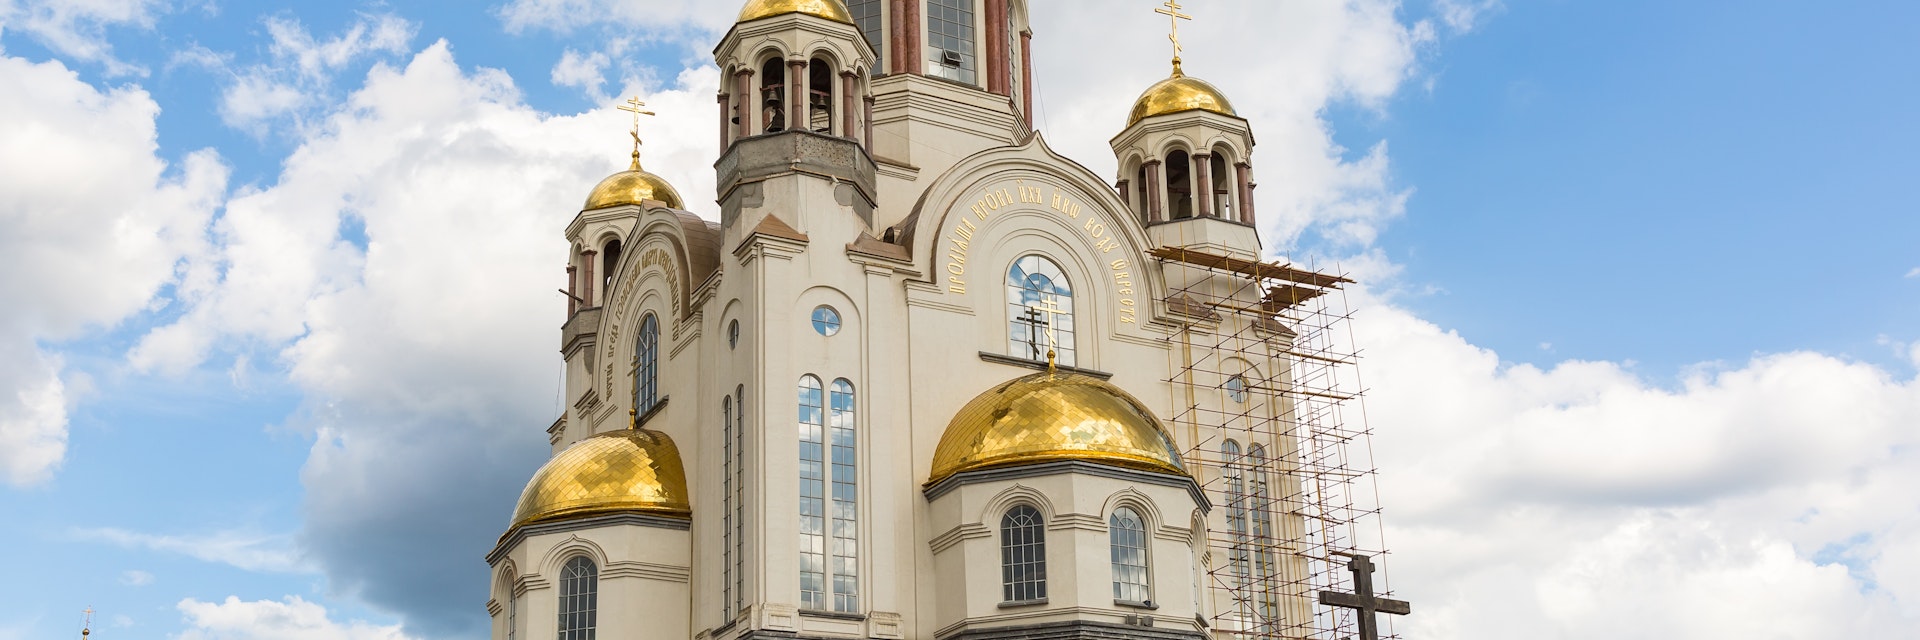 YEKATERINBURG, RUSSIA - AUG 07: Cathedral on the Blood standing on the site, where in 1918 the last royal family of Russia were executed on August 07, 2015 in Yekaterinburg, Russia. ; Shutterstock ID 305849435; purchase_order: 65050; job: ; client: ; other:
305849435